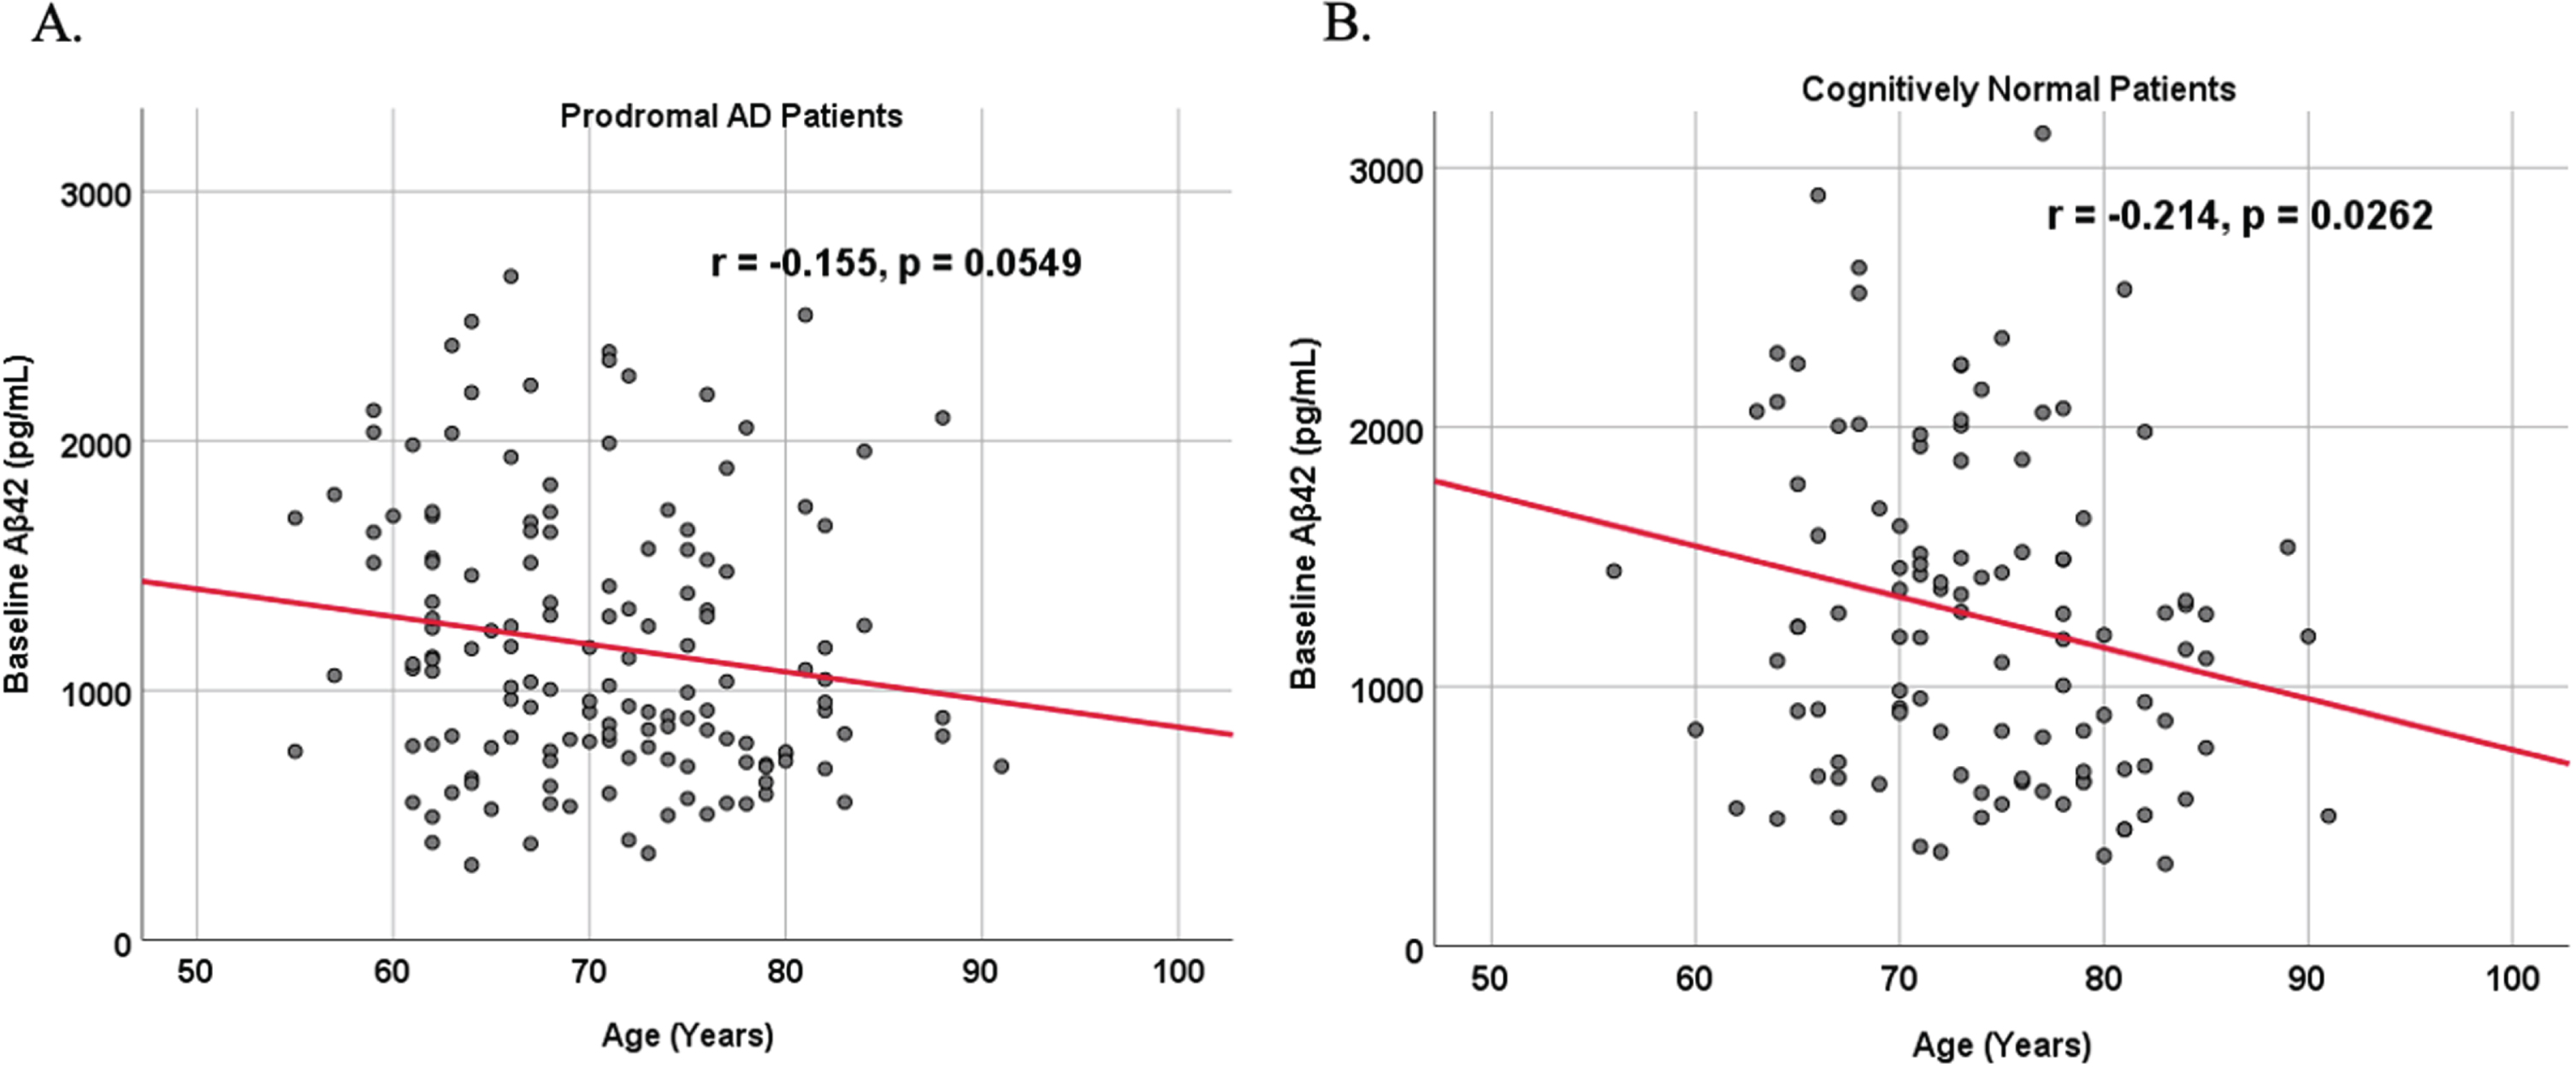 Associations between baseline Aβ42 and age in cognitively unimpaired control and prodromal participants. Scatterplots above are uncorrected for sex, education, and APOE. A) Aβ42 versus Age in prodromal AD dementia participants (r = –0.155, p = 0.0549). B) Aβ42 versus Age in cognitively unimpaired control participants (r = –0.214, p = 0.0262).